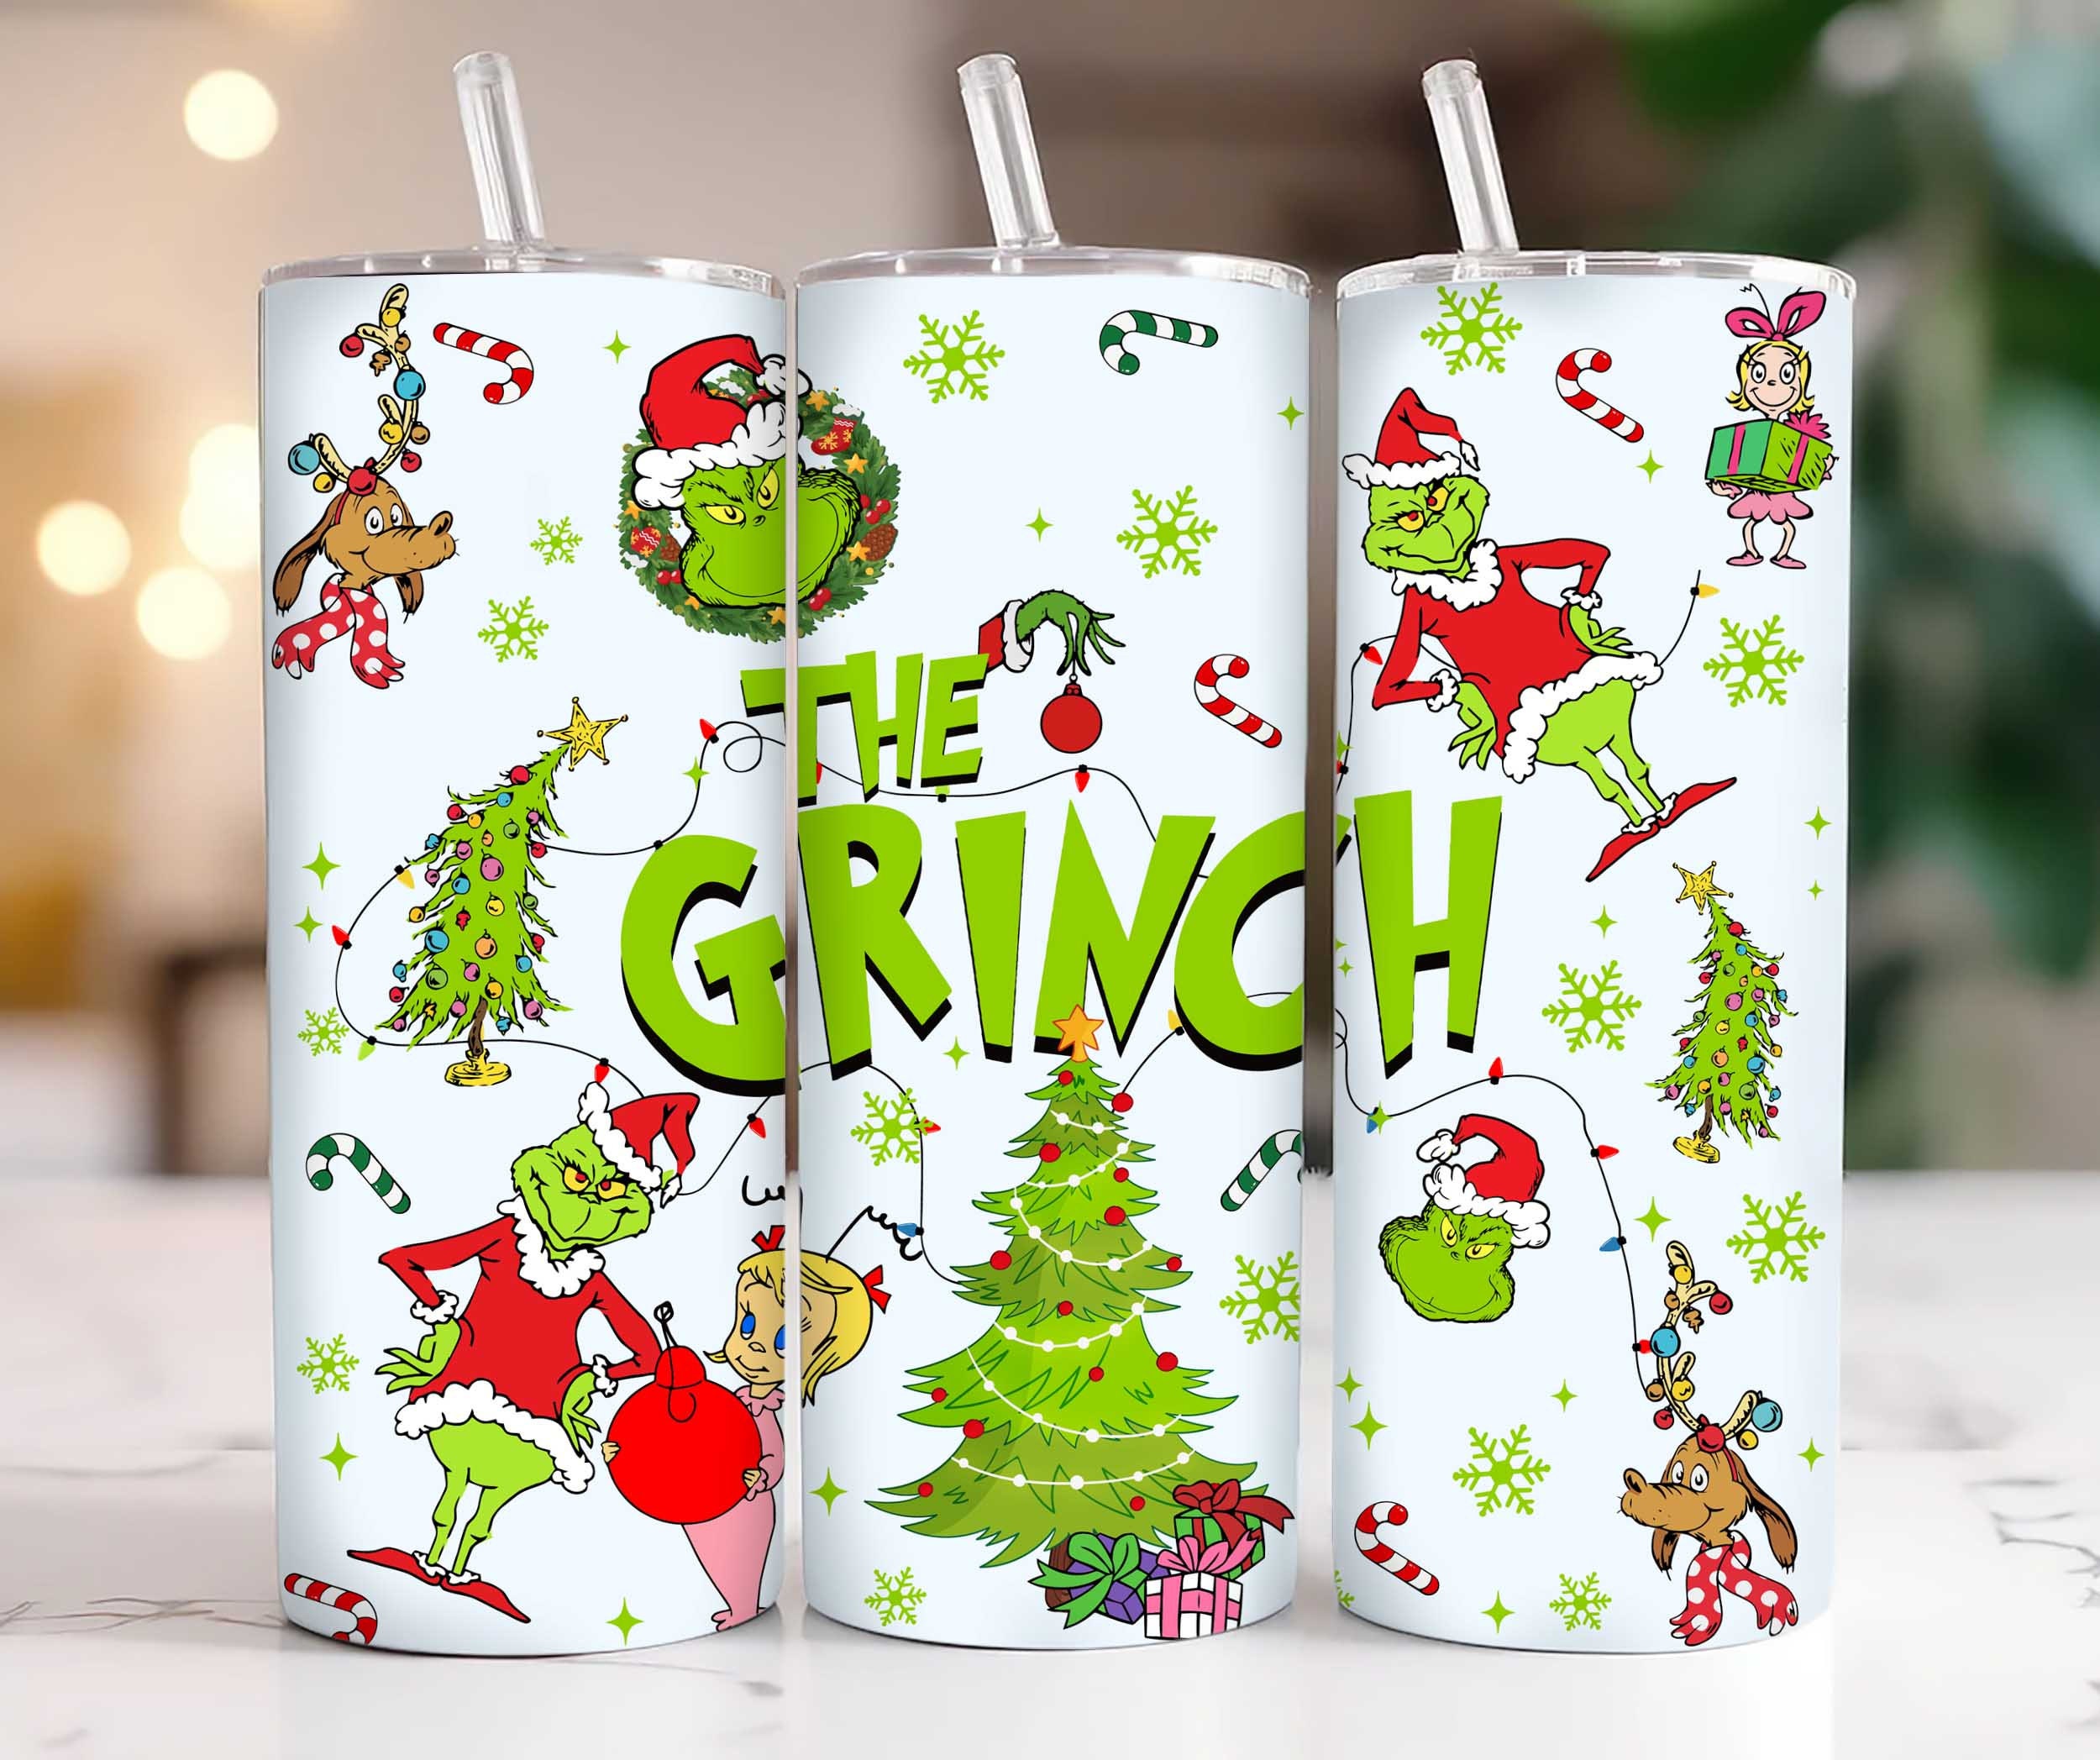 Grinch Wrap For Straight Tumbler-310